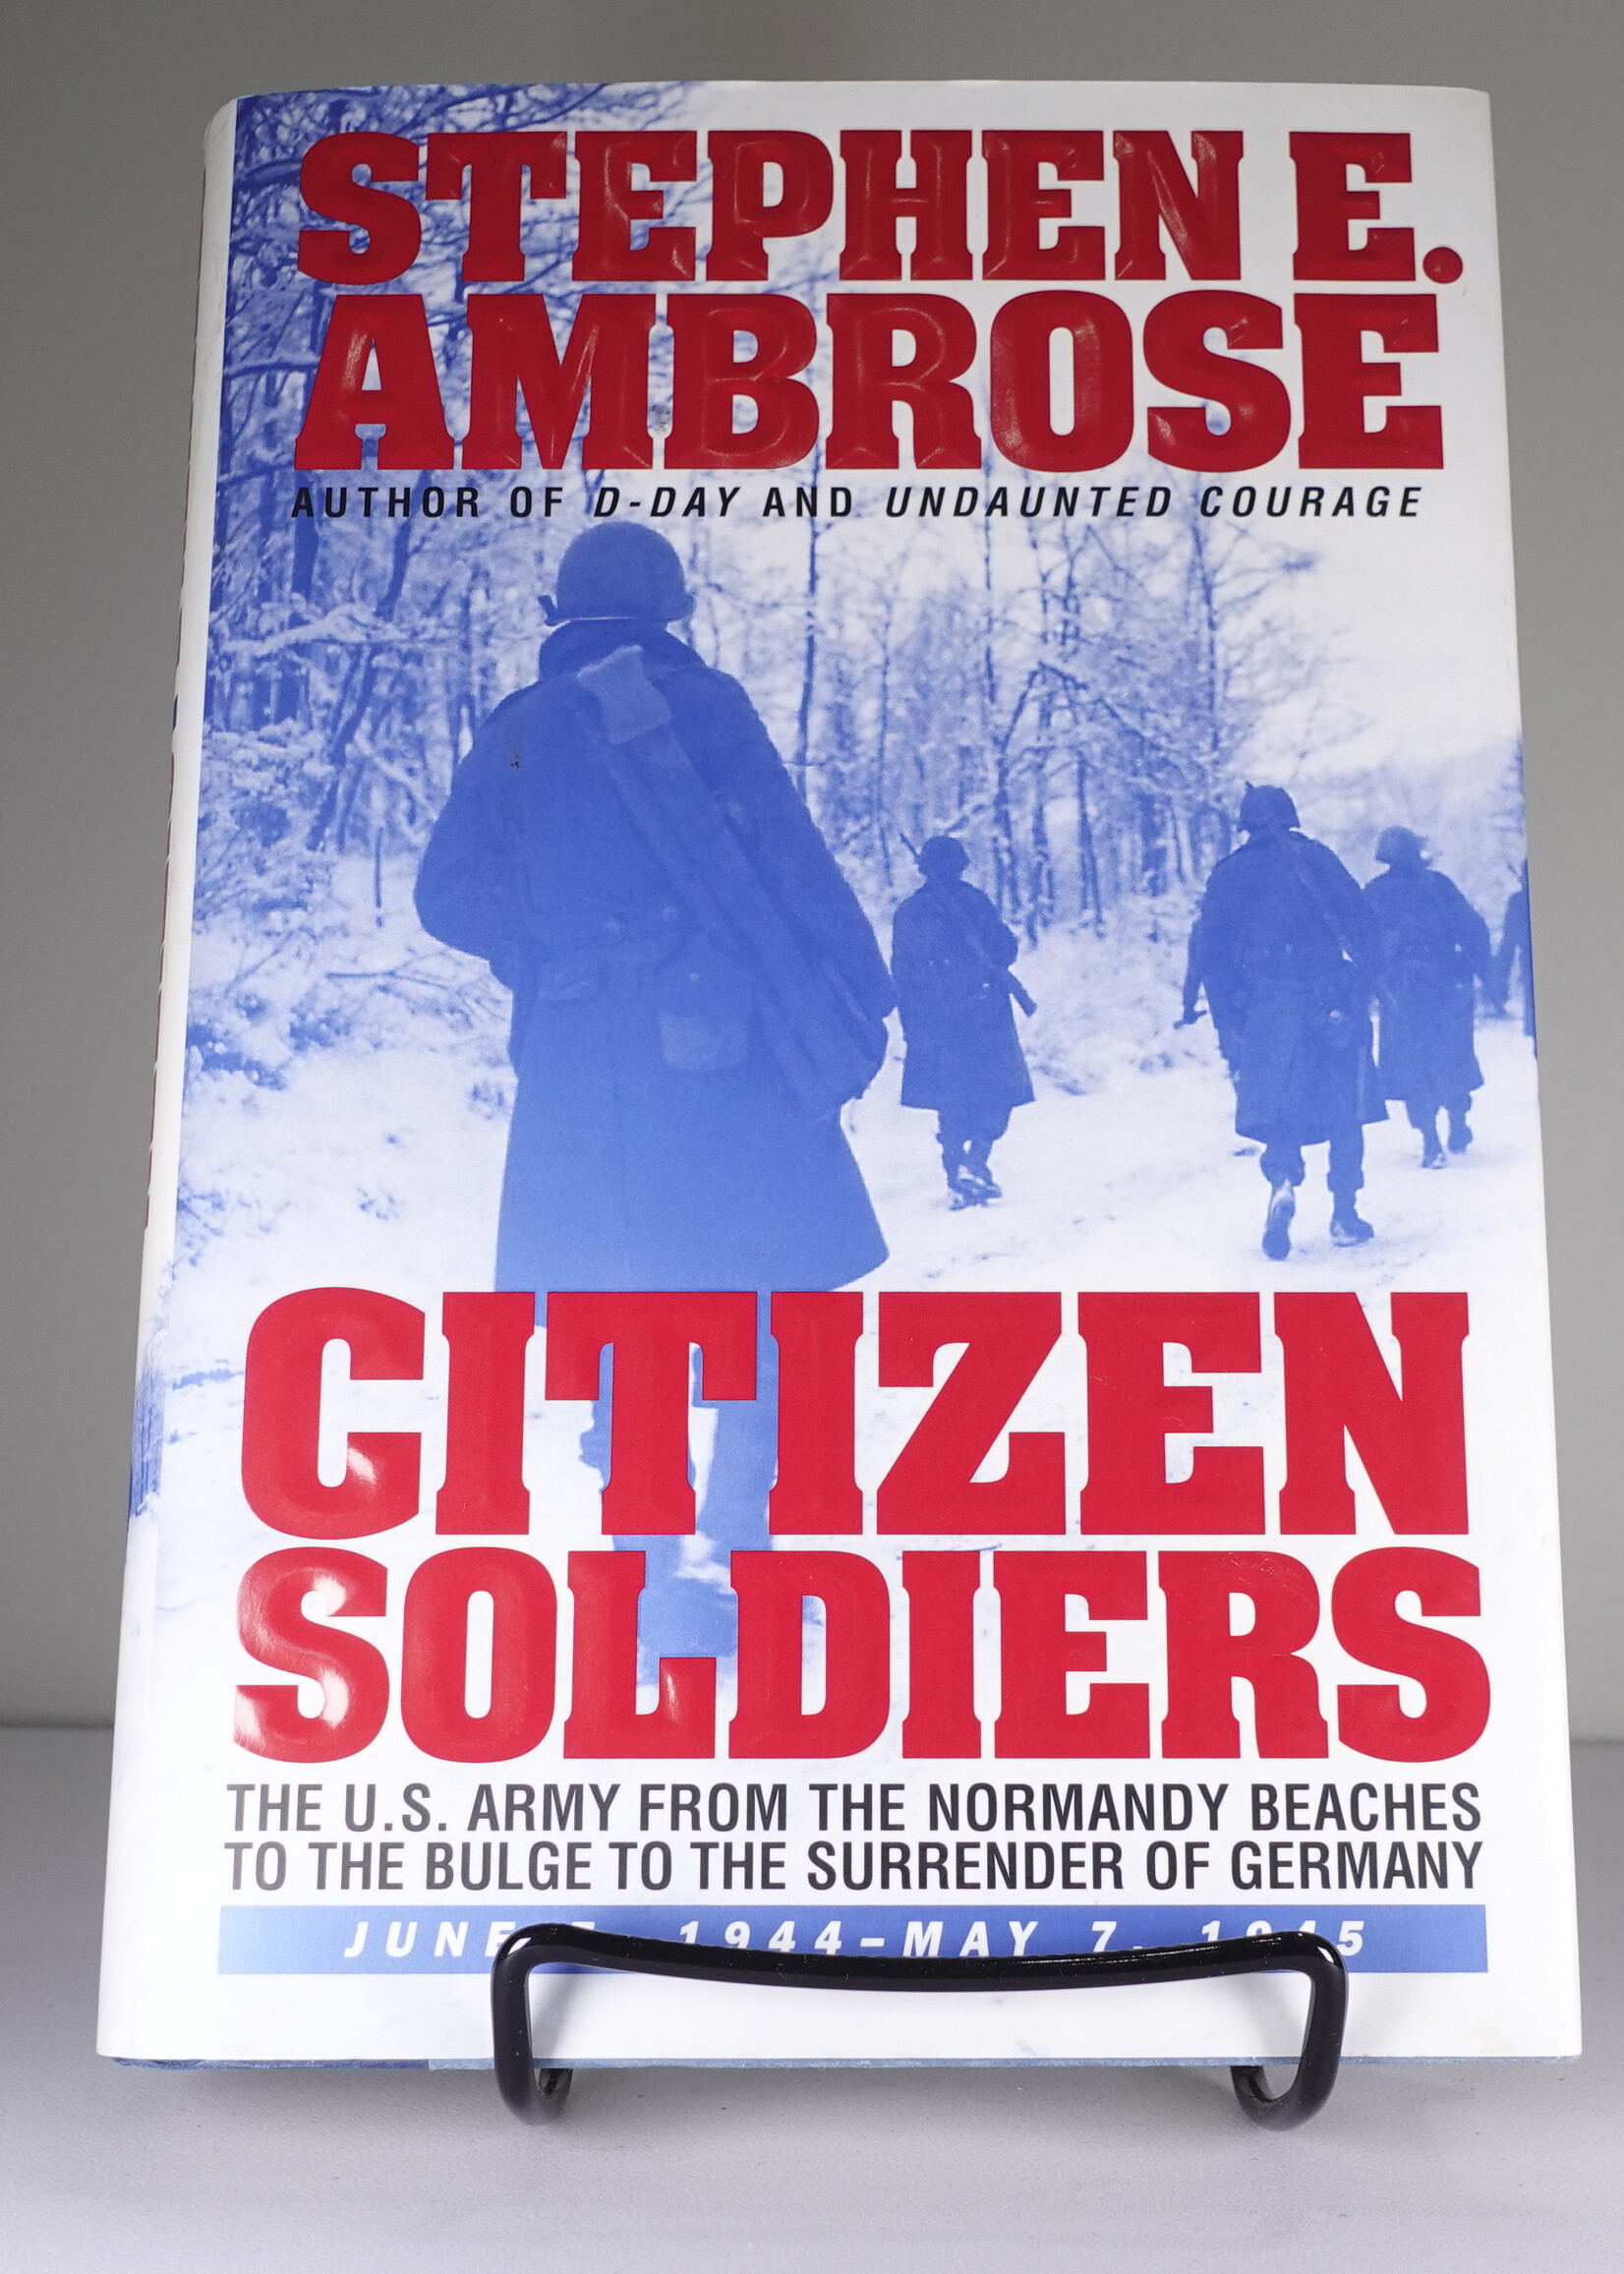 Citizen Soldiers: The U S Army from the Normandy Beaches to the Bulge to the Surrender of Germany June 7, 1944-May 7, 1945